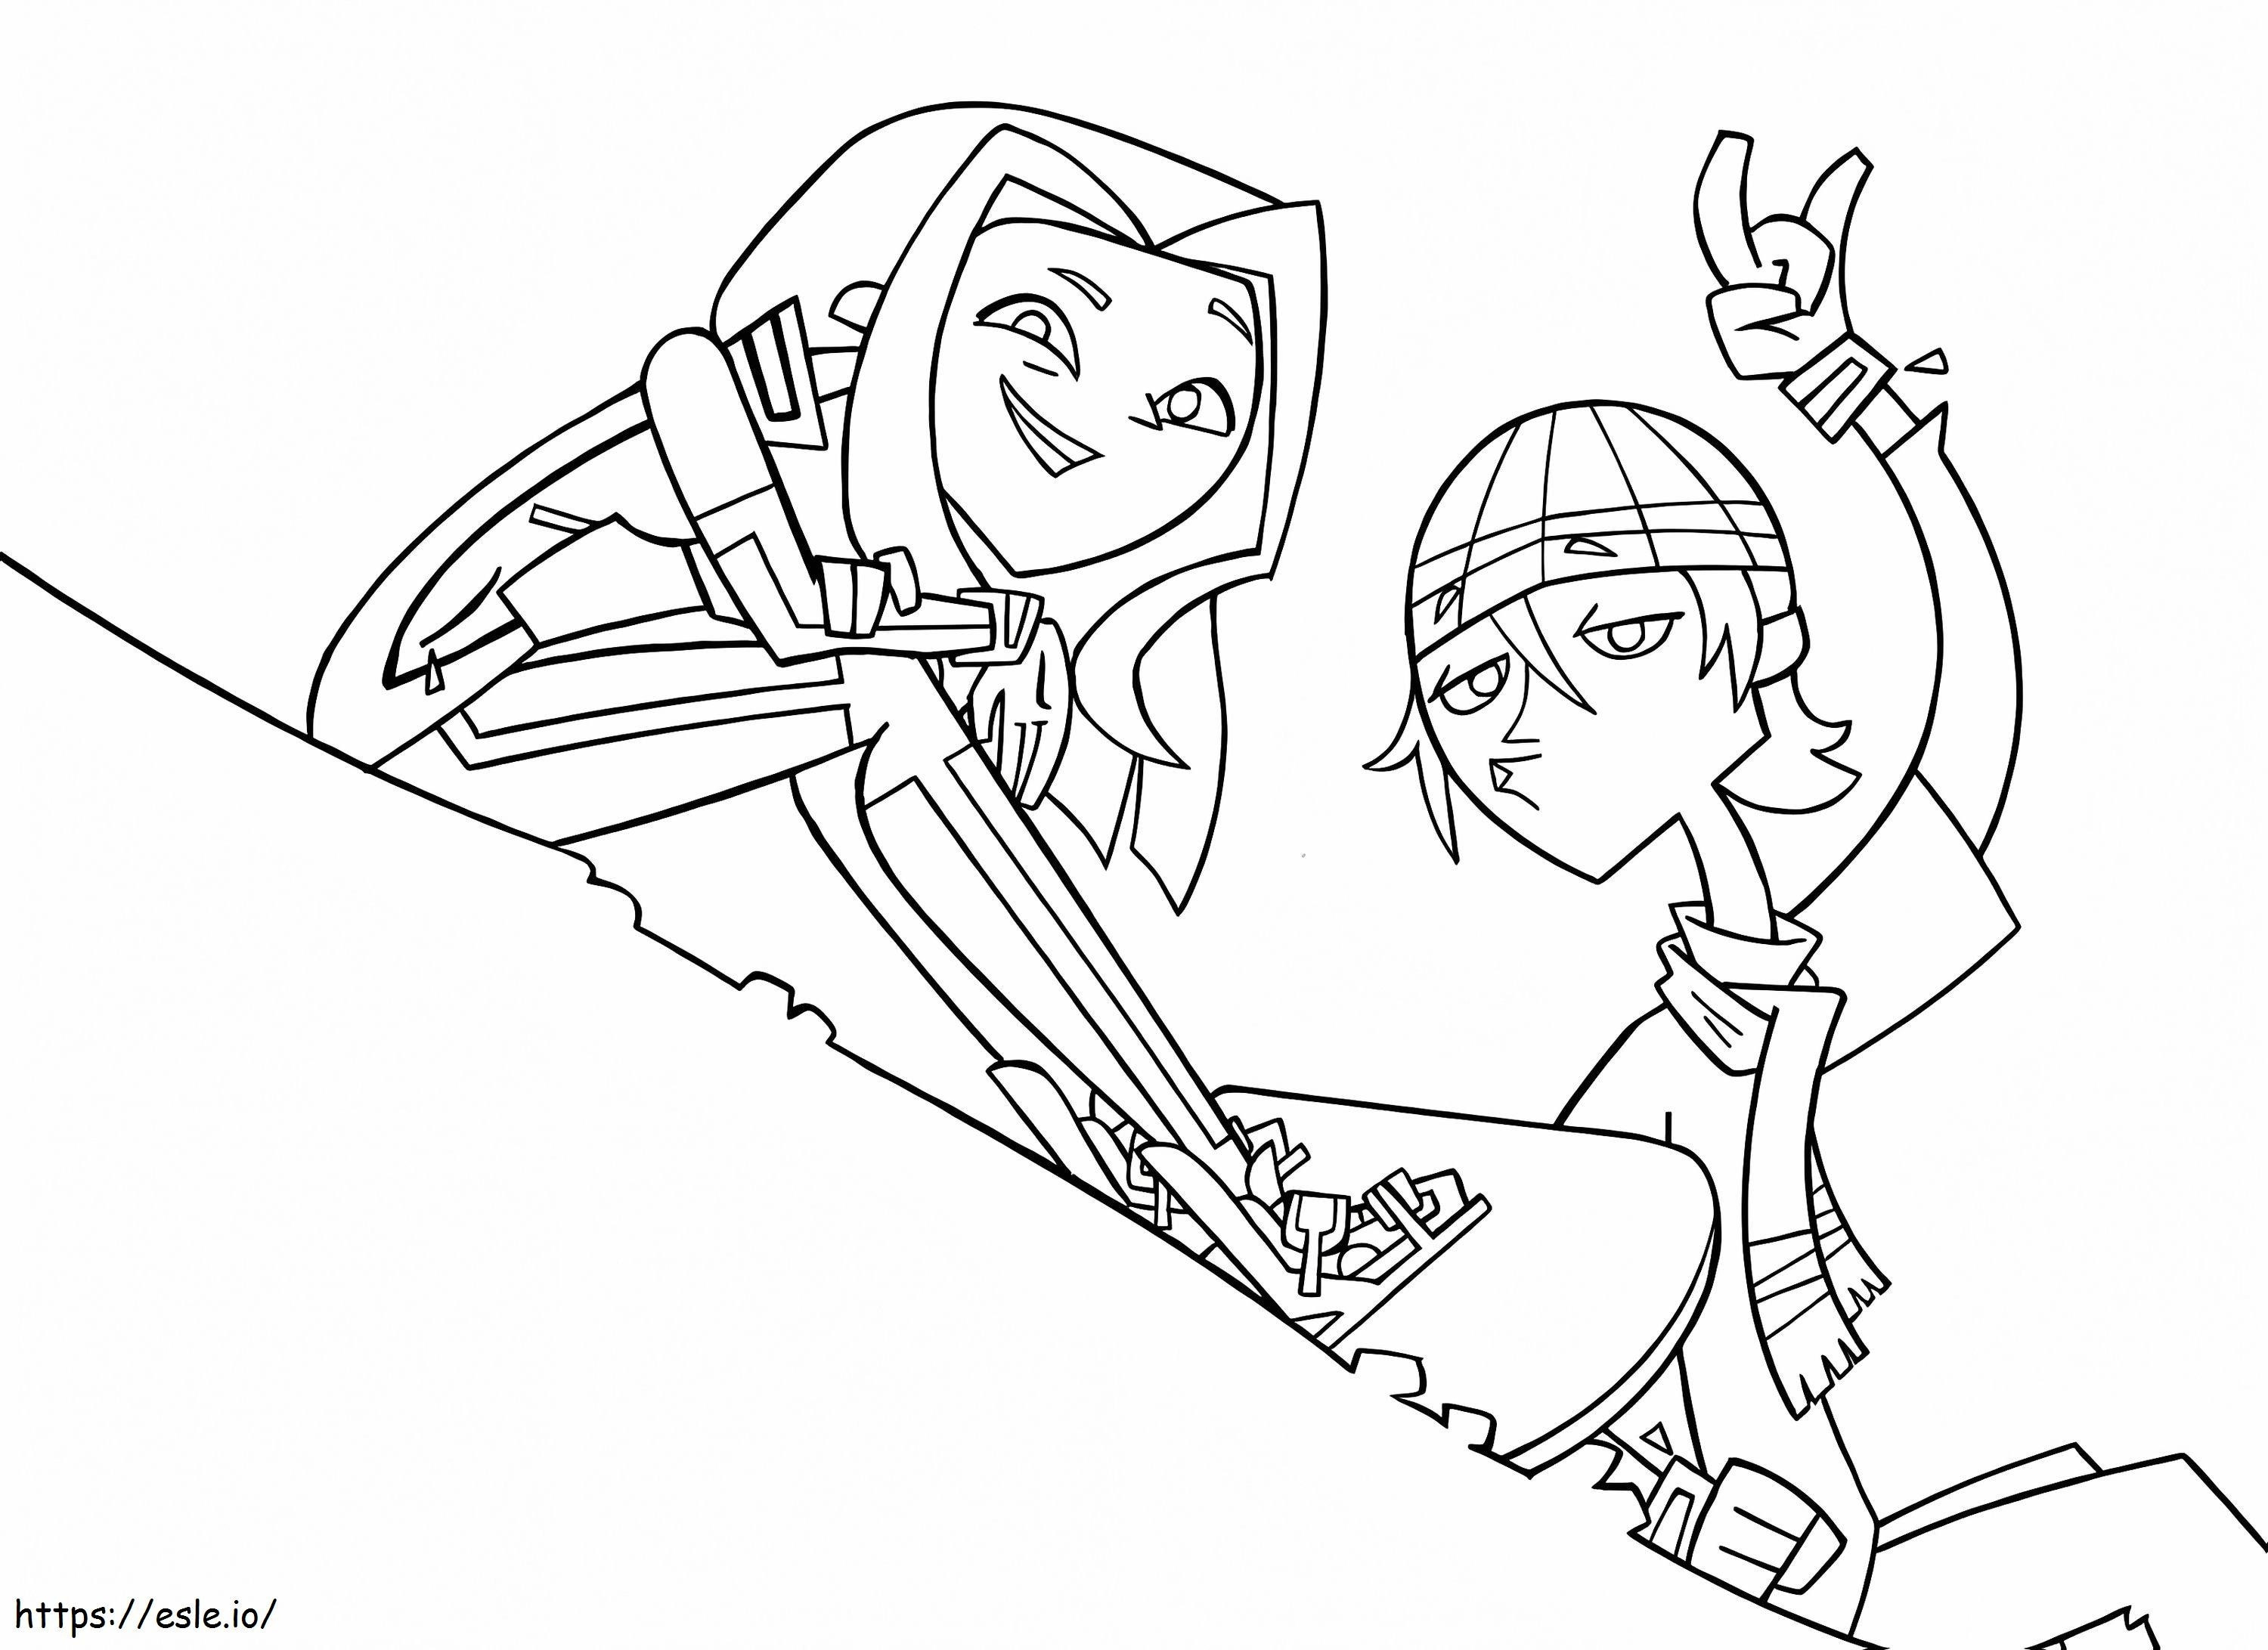 Characters In 6Teen 1 coloring page